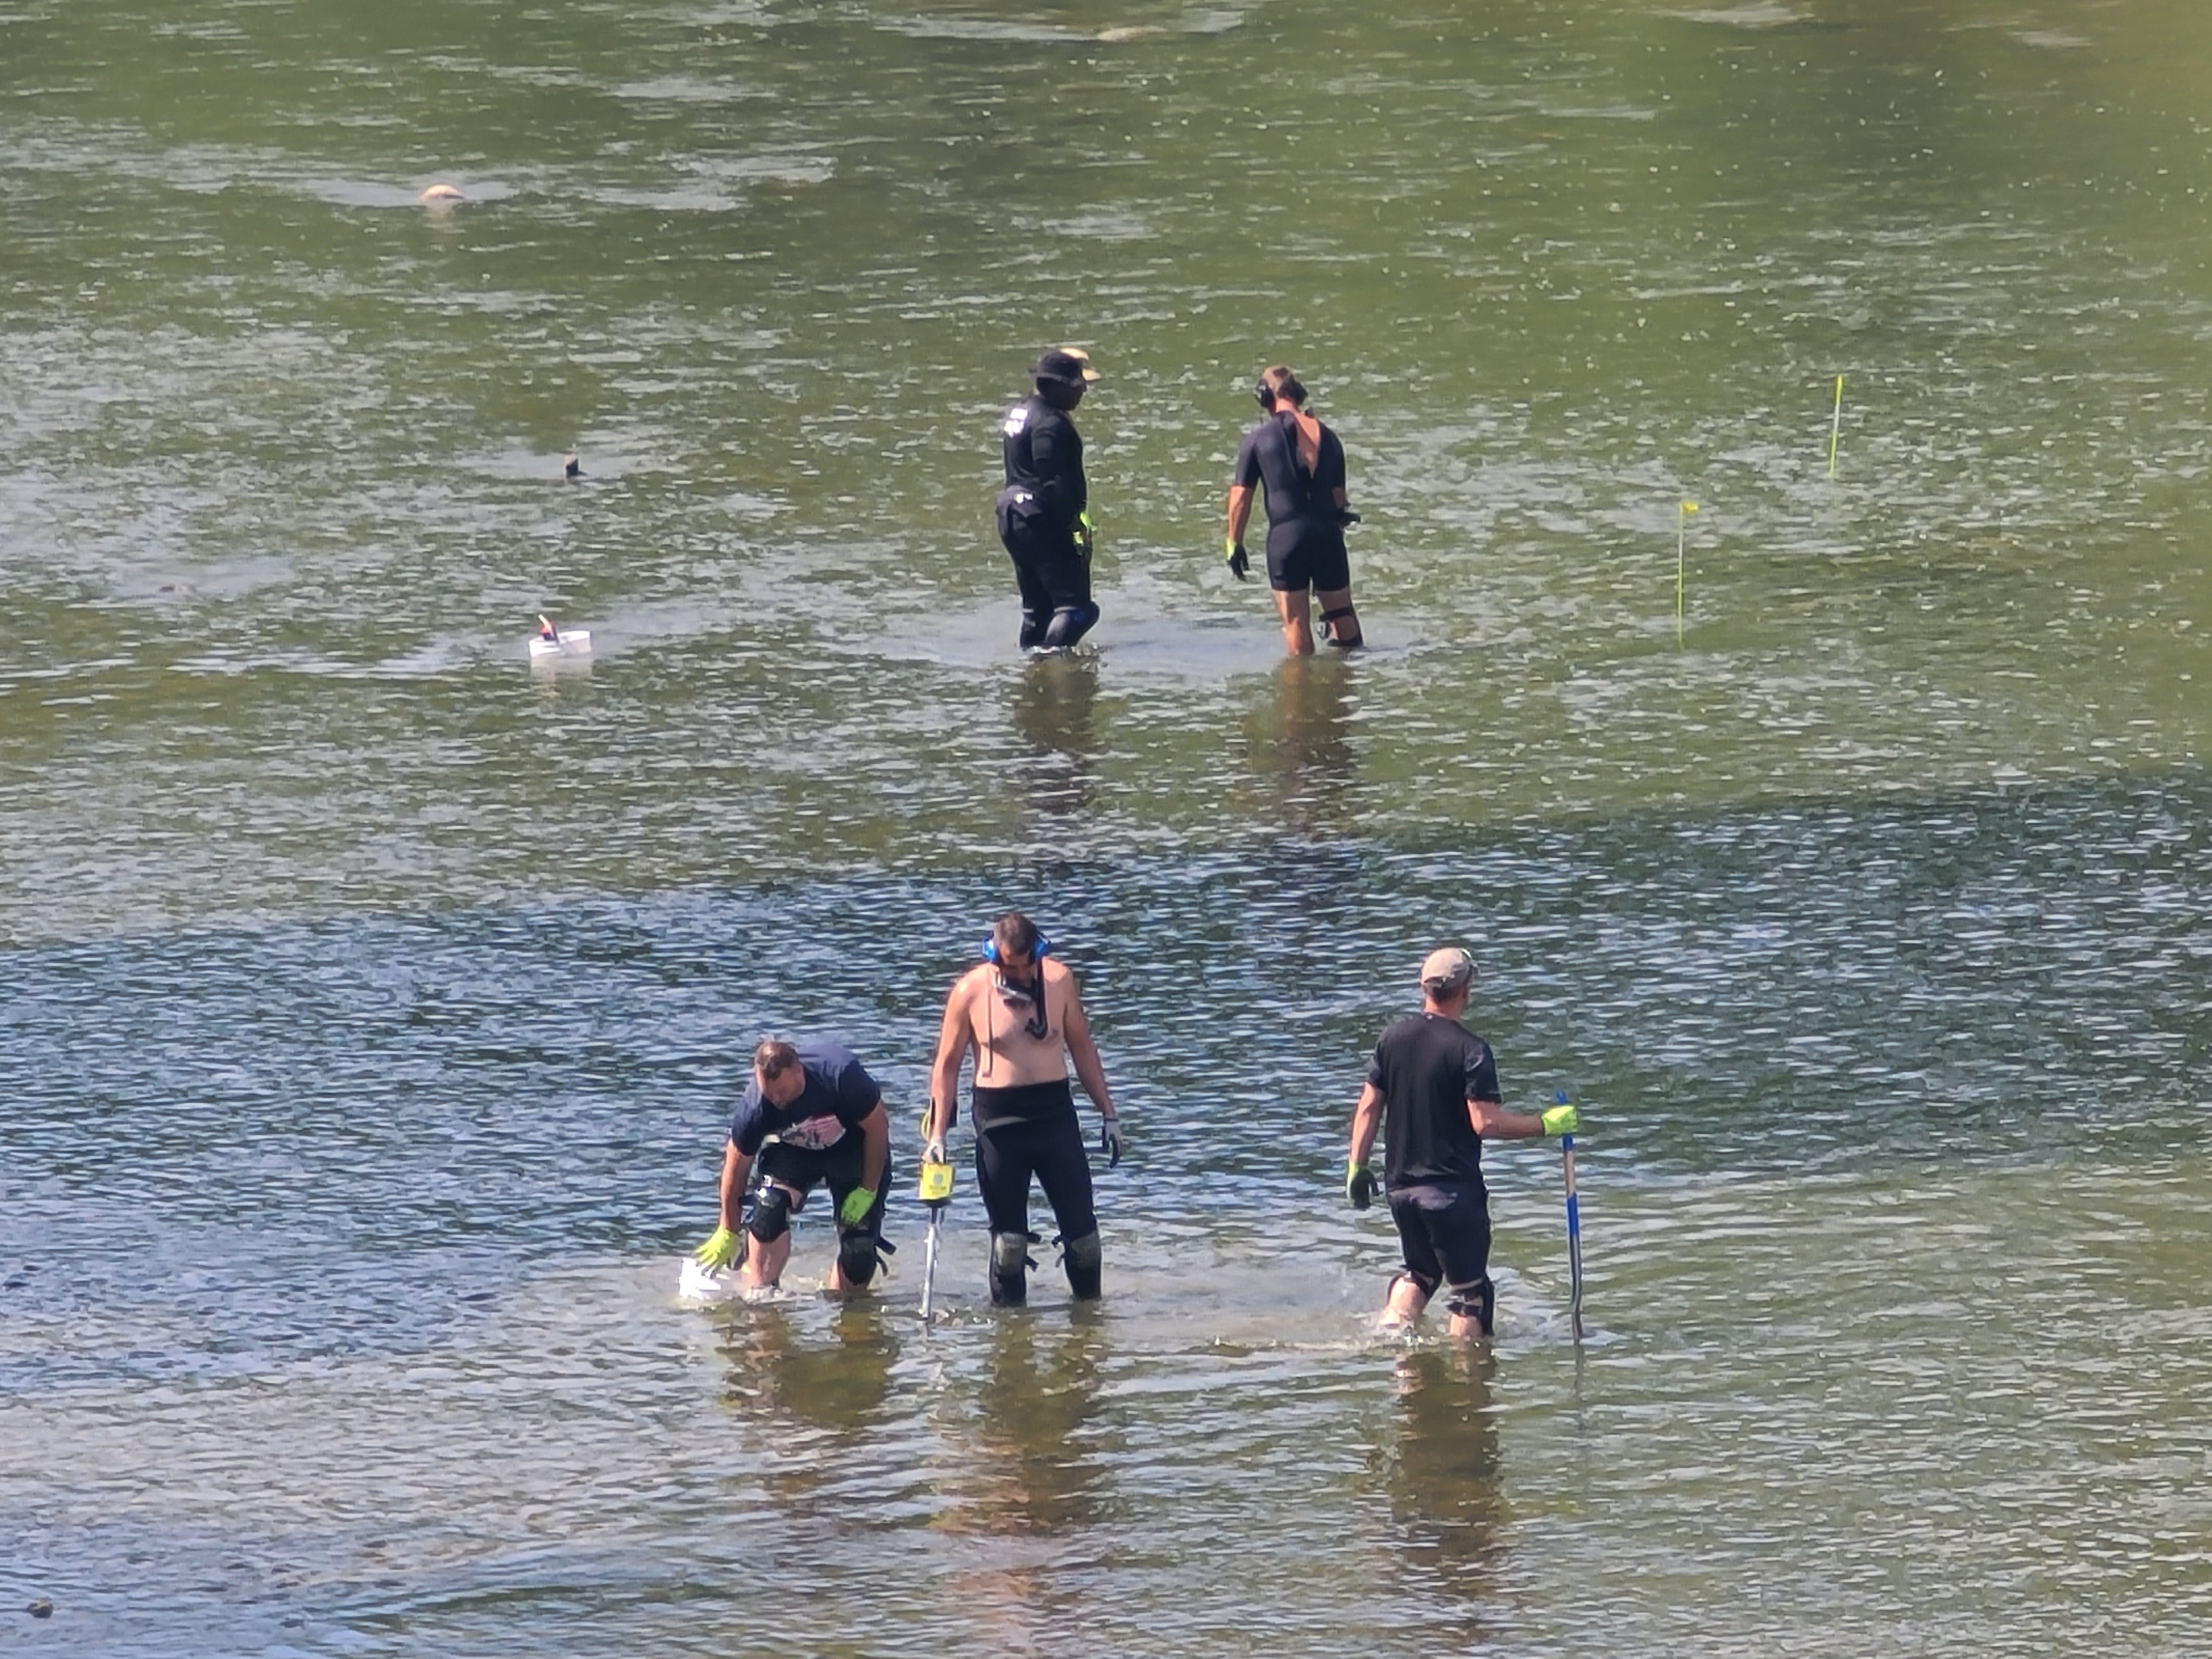 The officers from the Indiana State Police used metal detectors and shovels to search the river